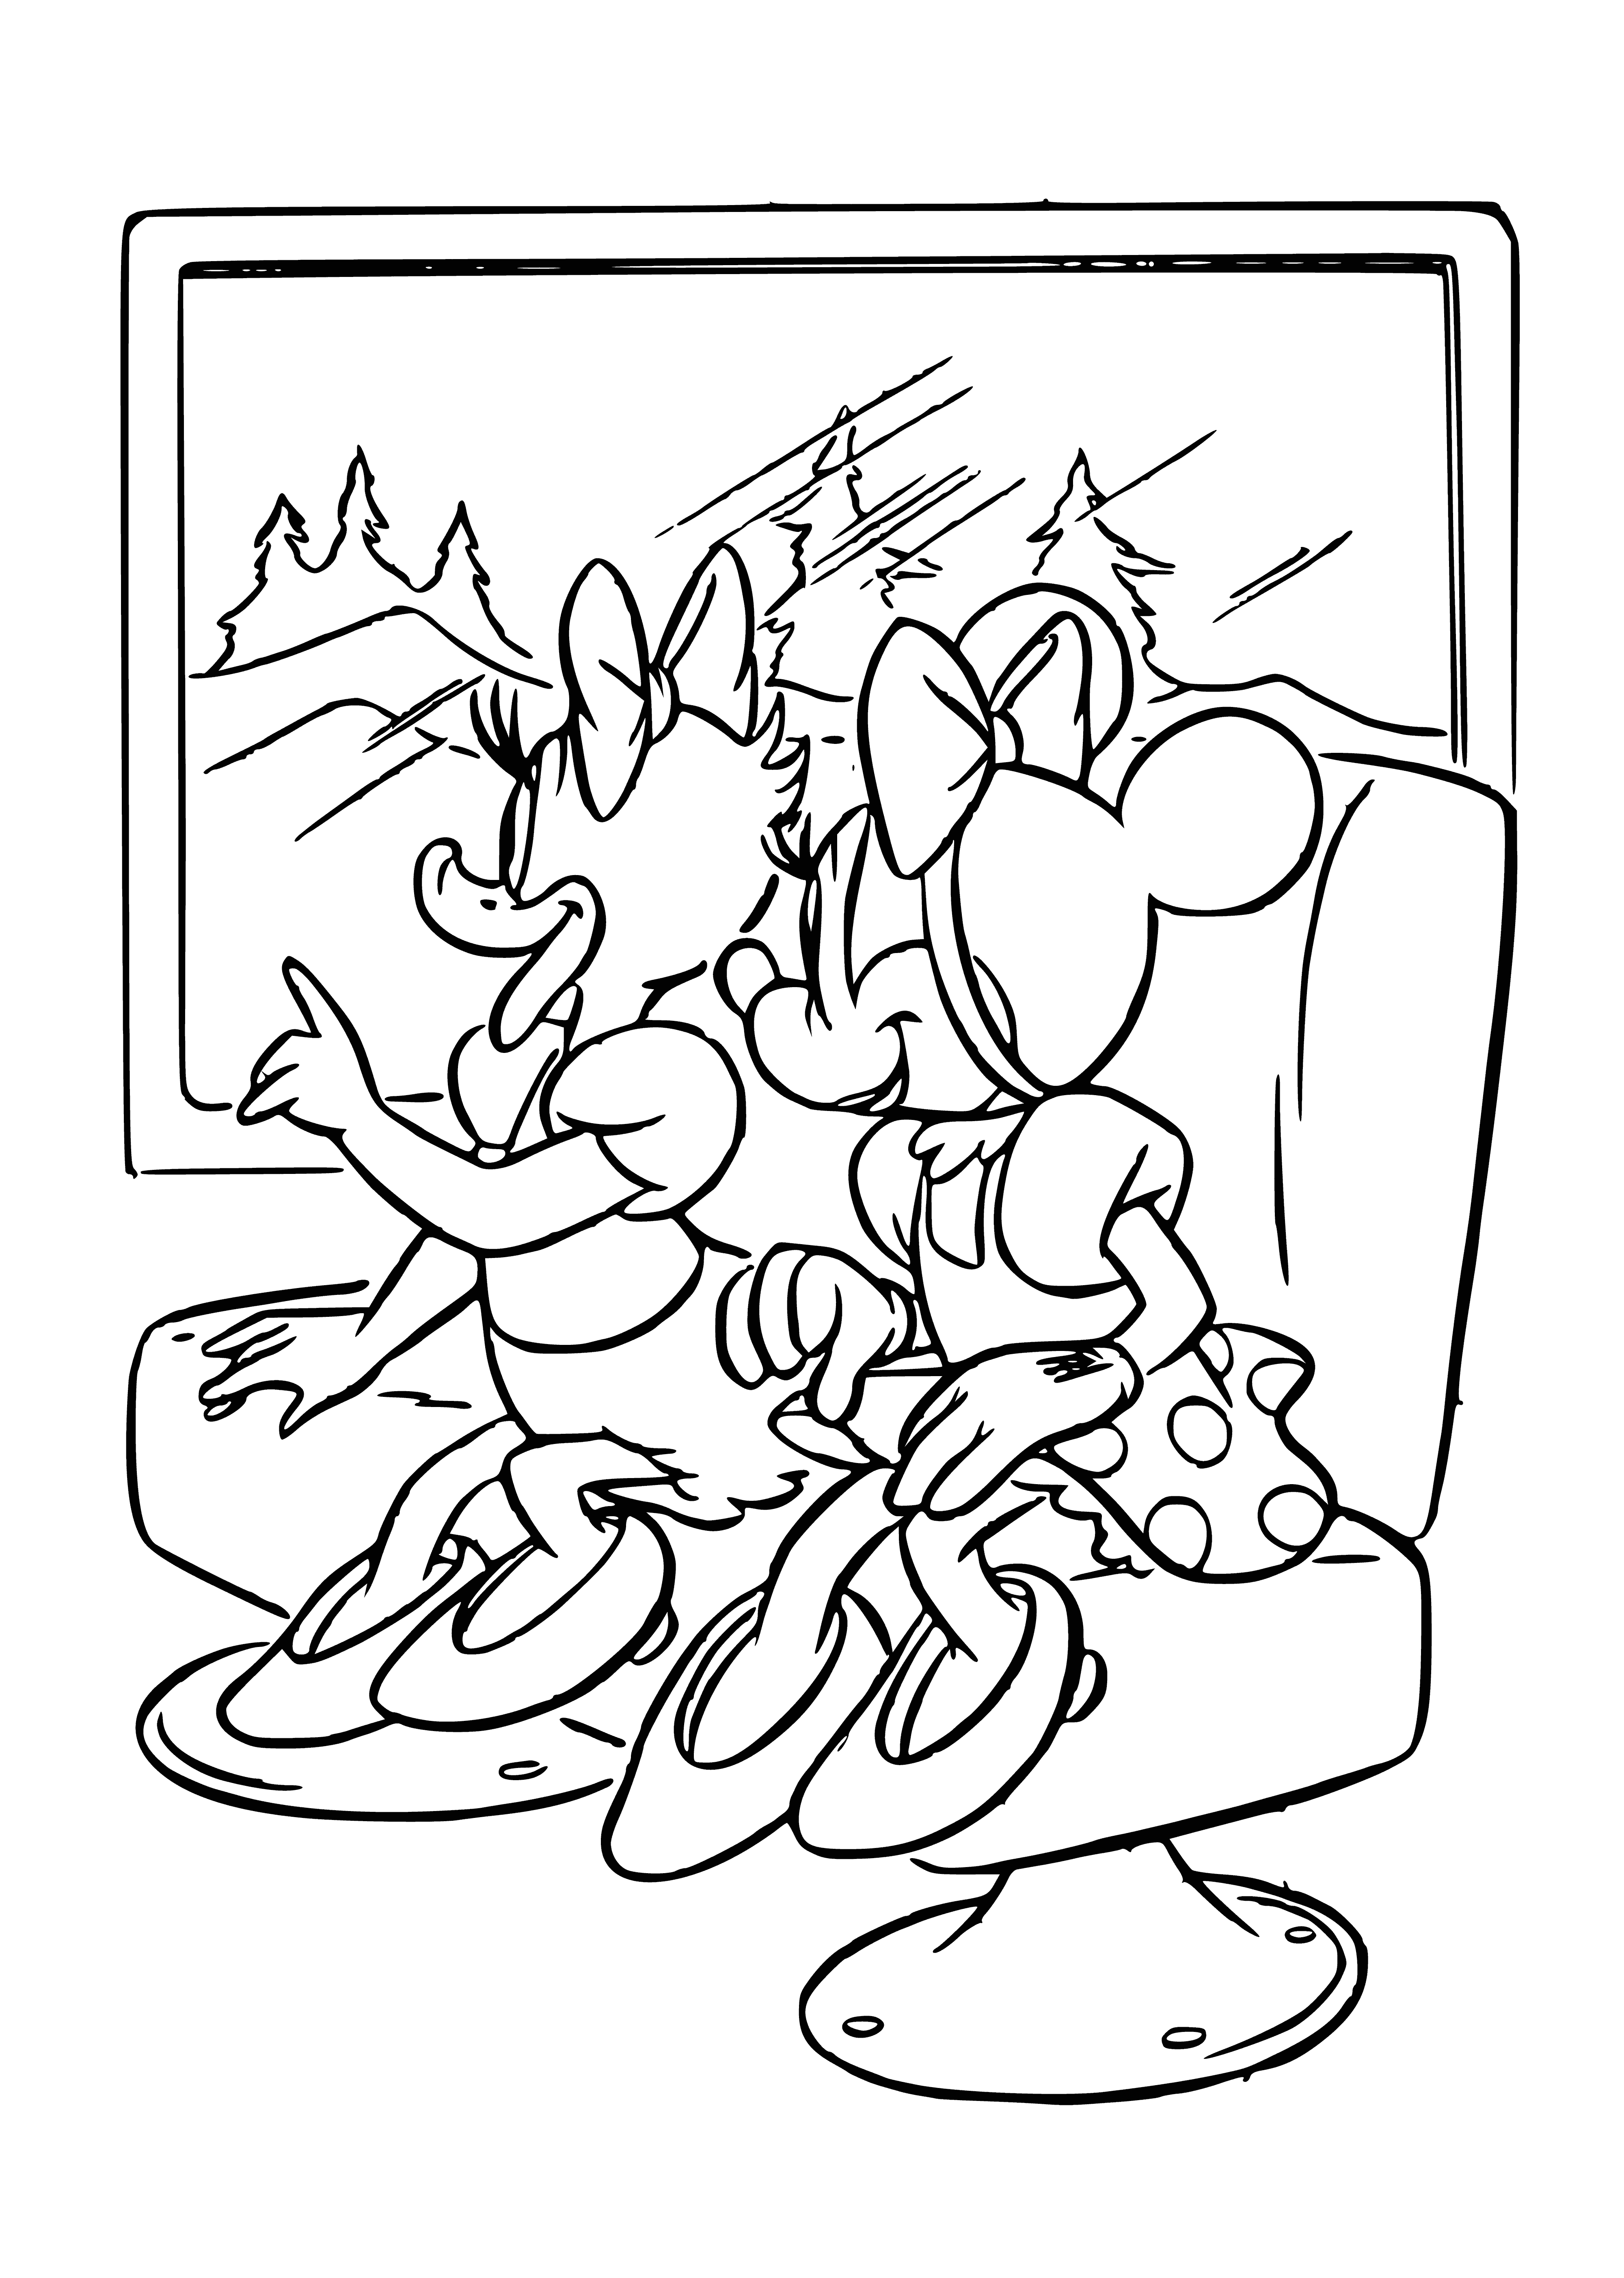 coloring page: Mickey Mouse holds hands with Daisy and Minnie, smiling in front of a large blue building with a red roof. #Disney #coloringpage